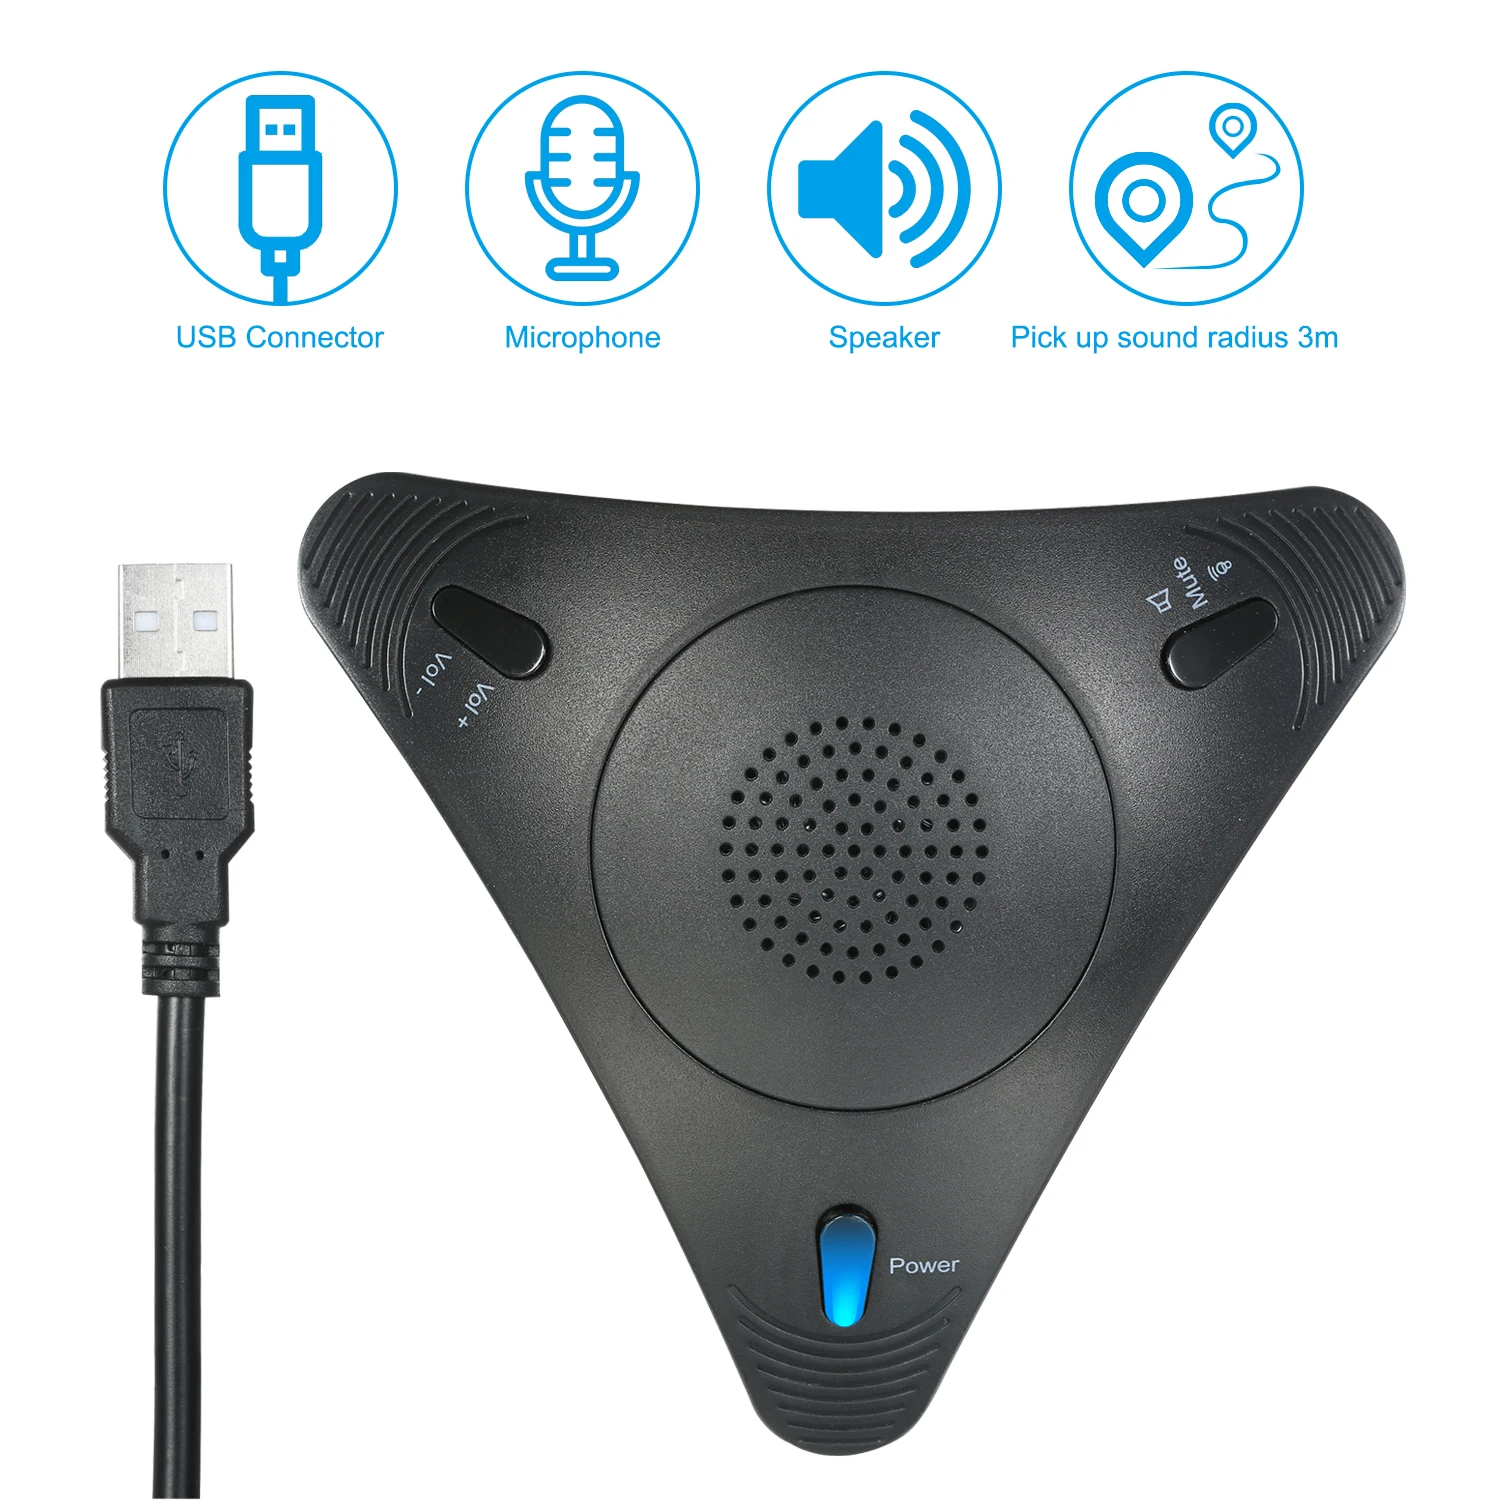 

USB Conference Microphone VOIP Omnidirectional Desktop Wired Microphone Built-in Speaker Support Volume Control Mute Function